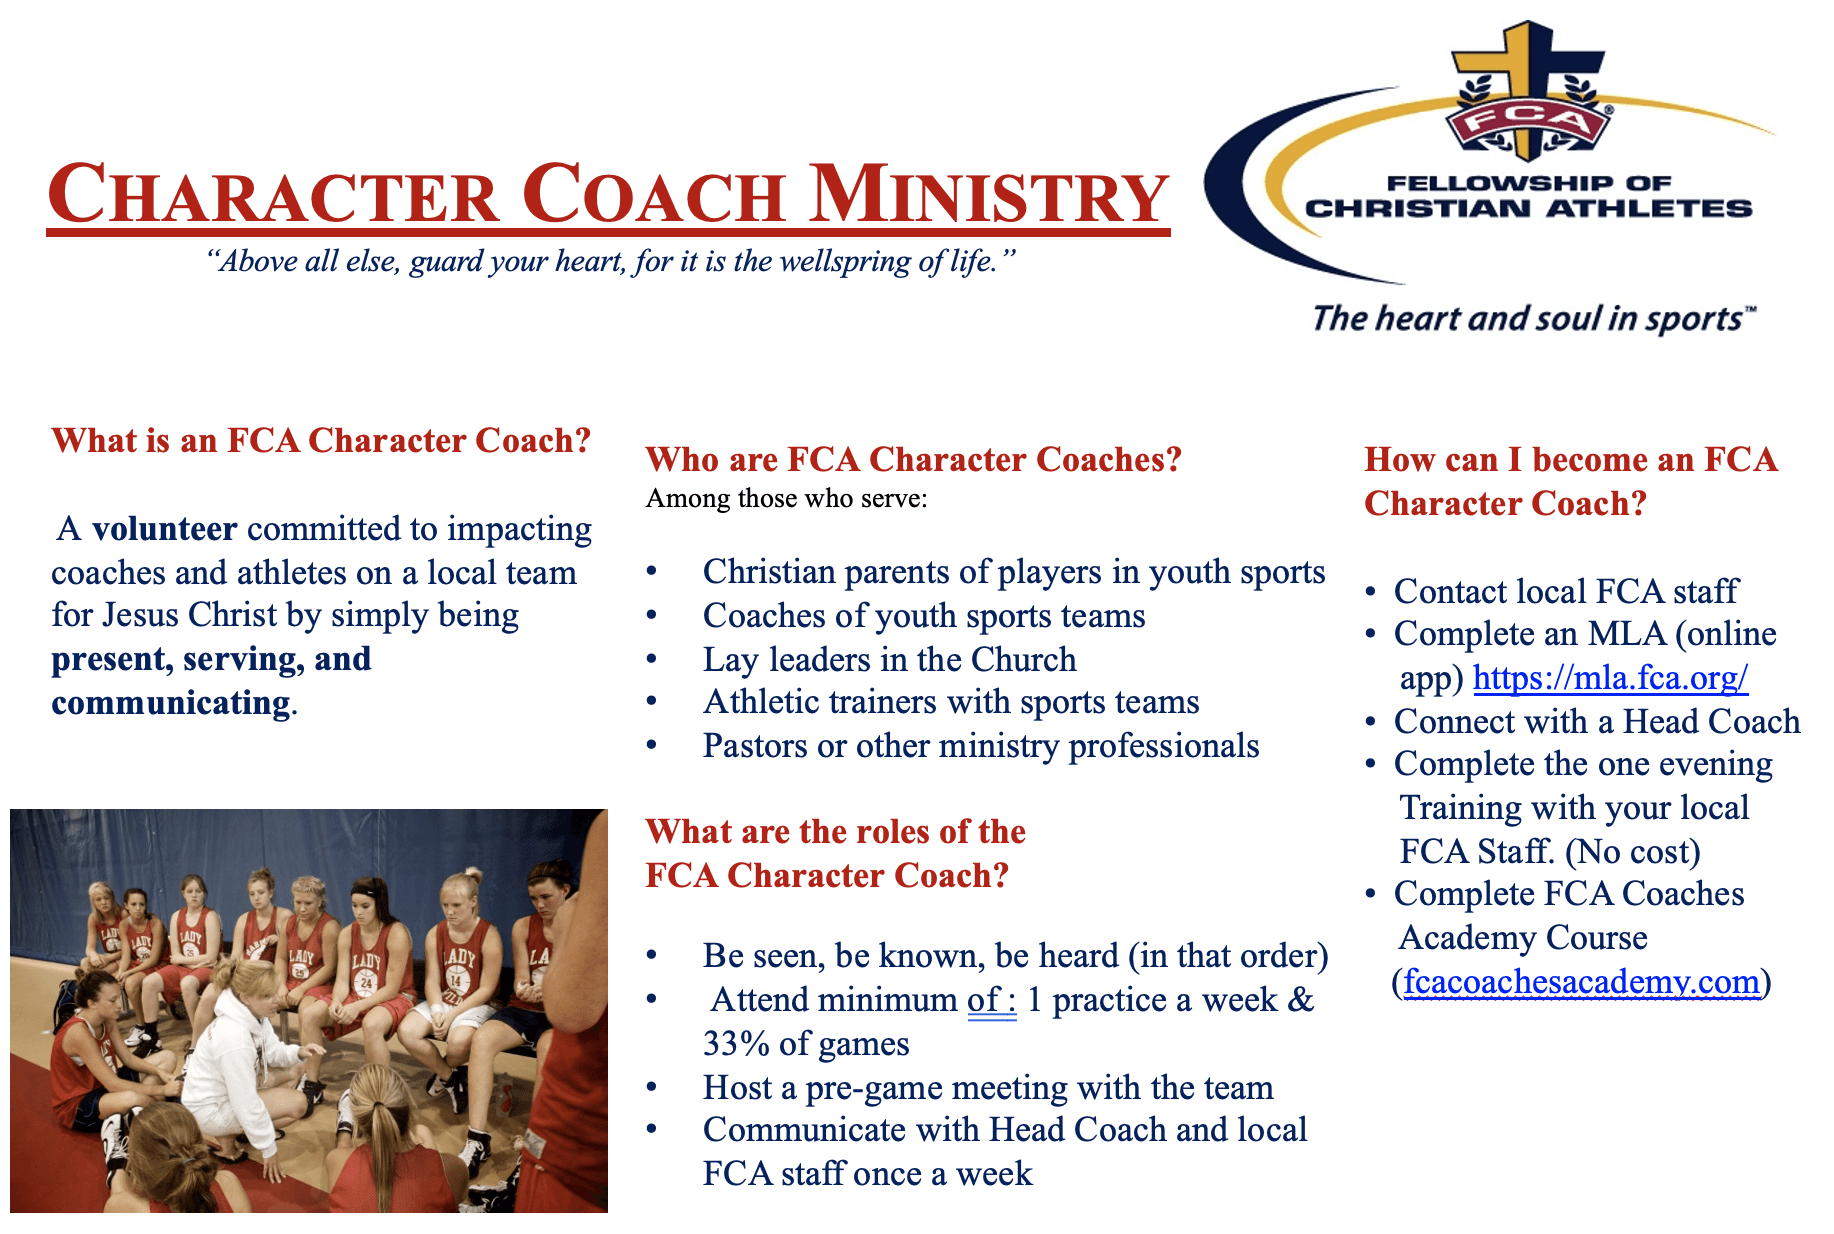 Become a Character Coach!